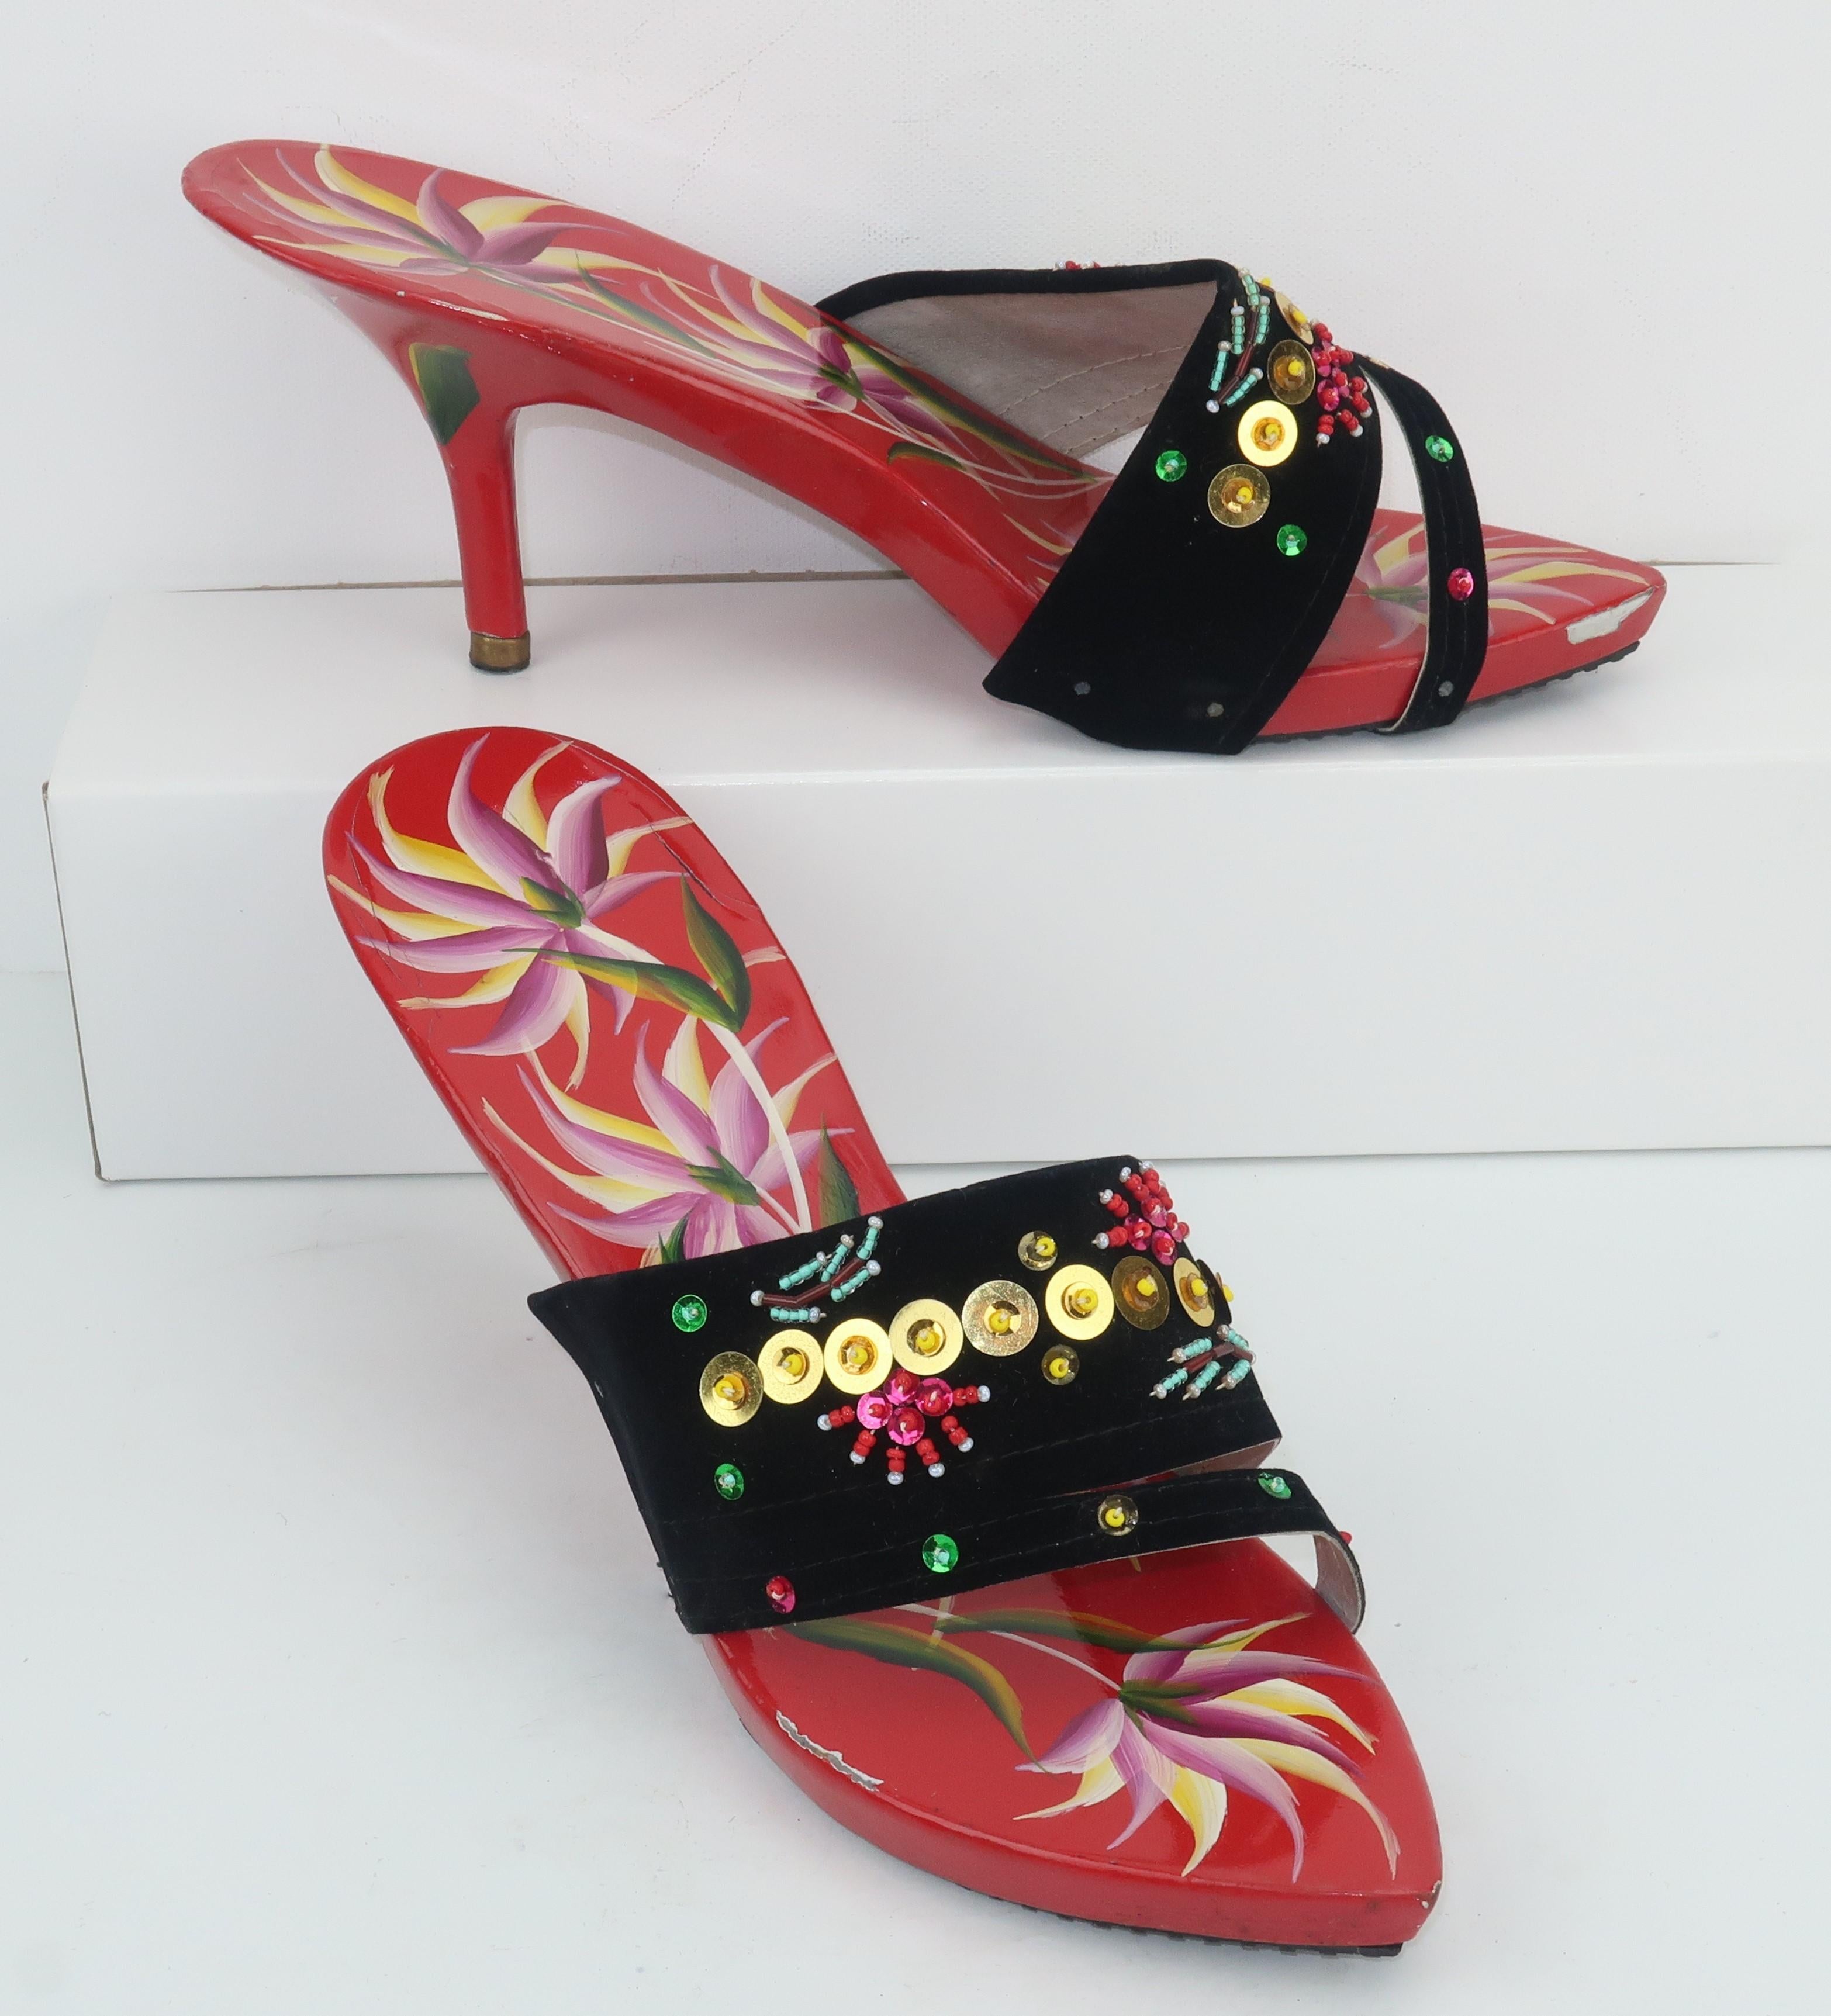 A classic 1950's heeled mule shoe with the exotic touch of a wooden hand painted base decorated in shades of bright red, orchid purple, yellow, white and green.  The vamp is a black felted fabric embellished with sequins and beading in shades of